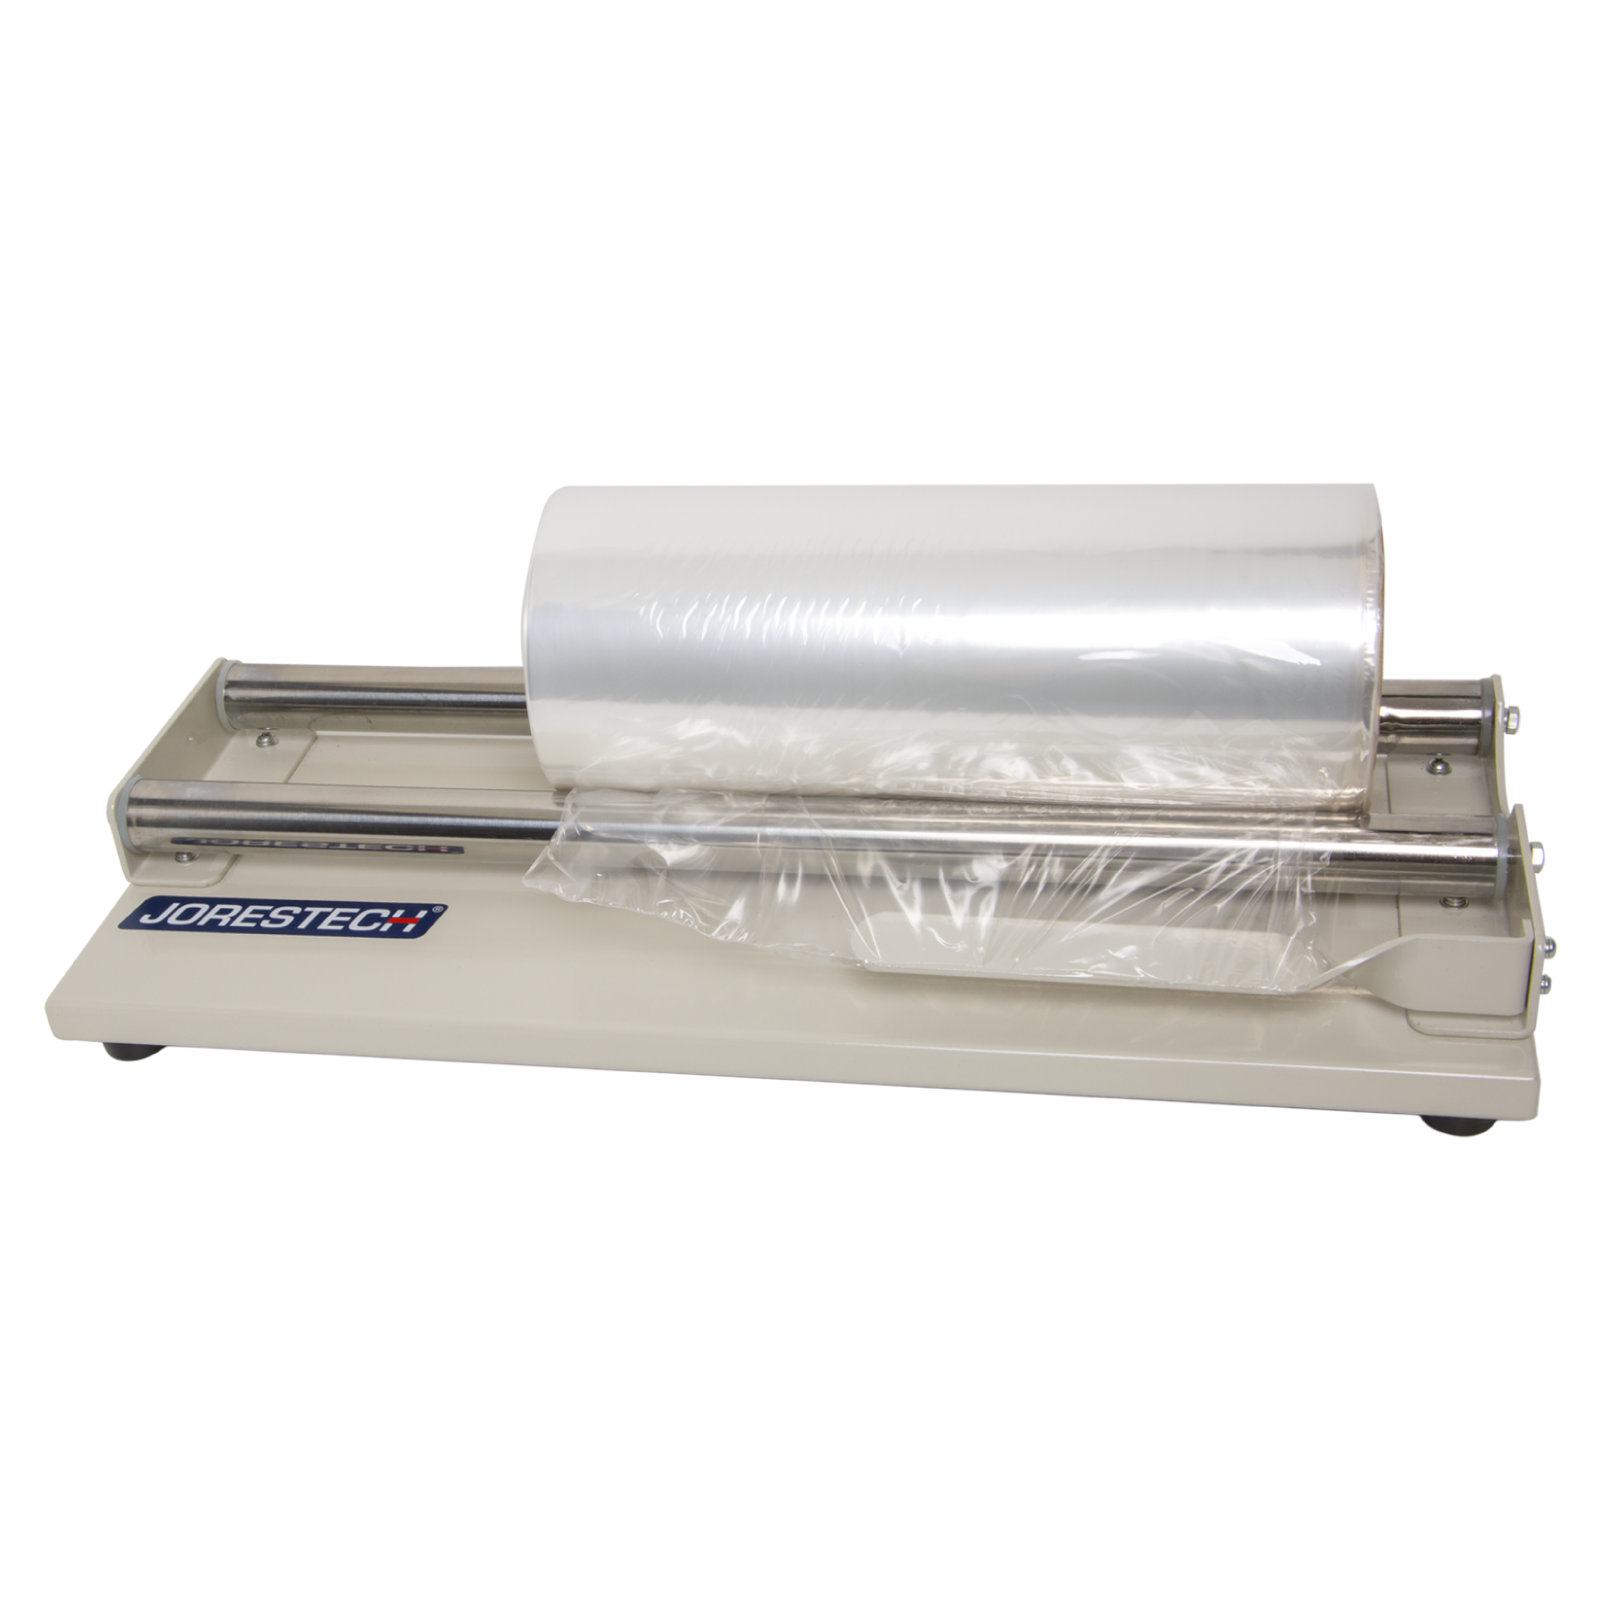 Plastic shrink wrap roll dispenser with a shrink roll placed ready to be used.